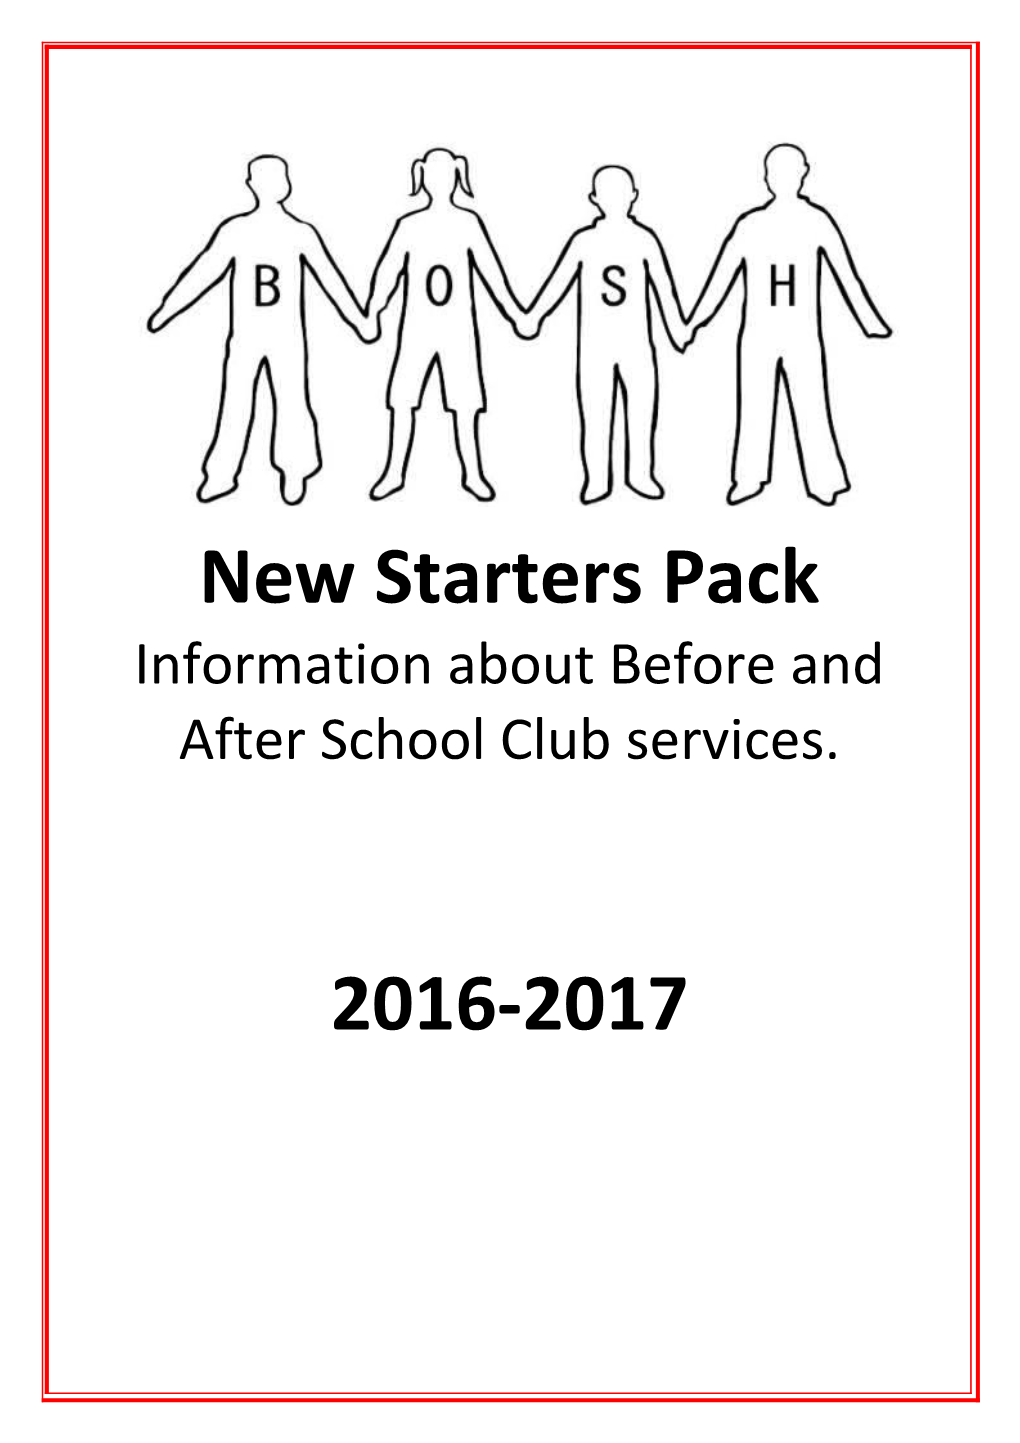 Information About Before and After School Club Services